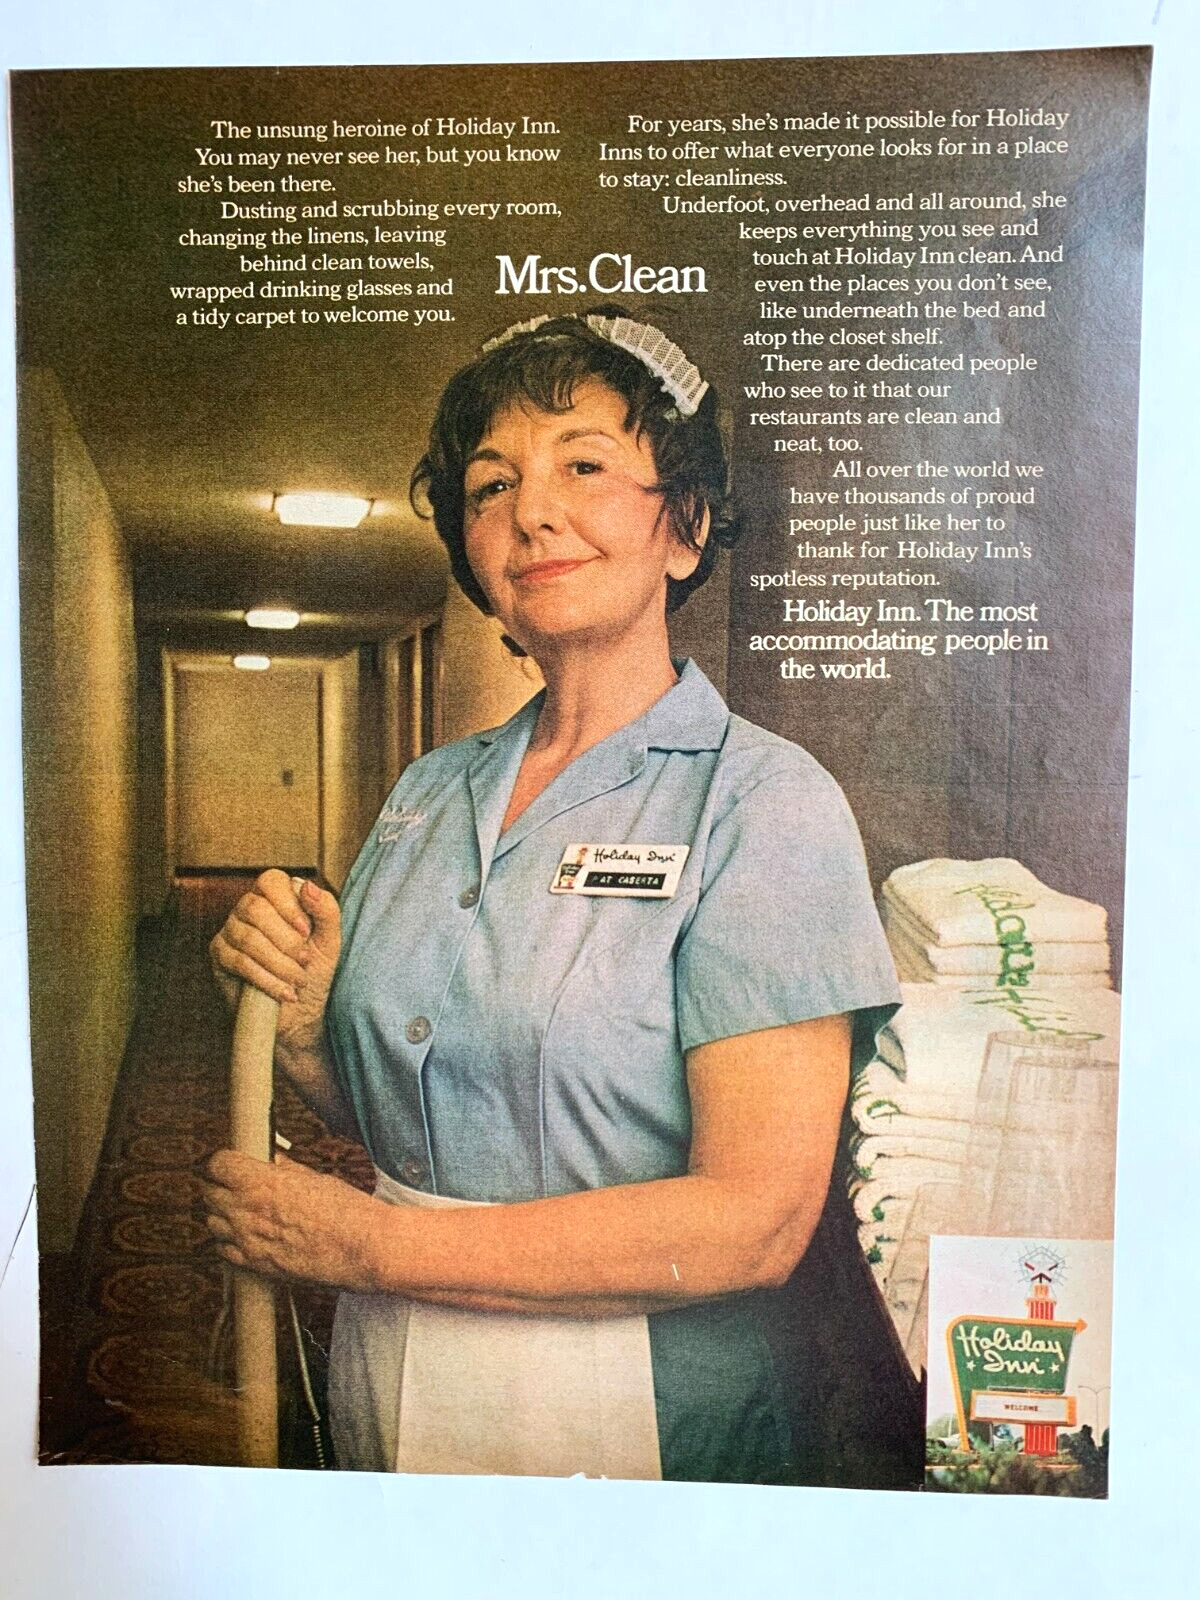 1972 Print Ad  Holiday Inn 13in x 10 in Mrs Clean Room Service